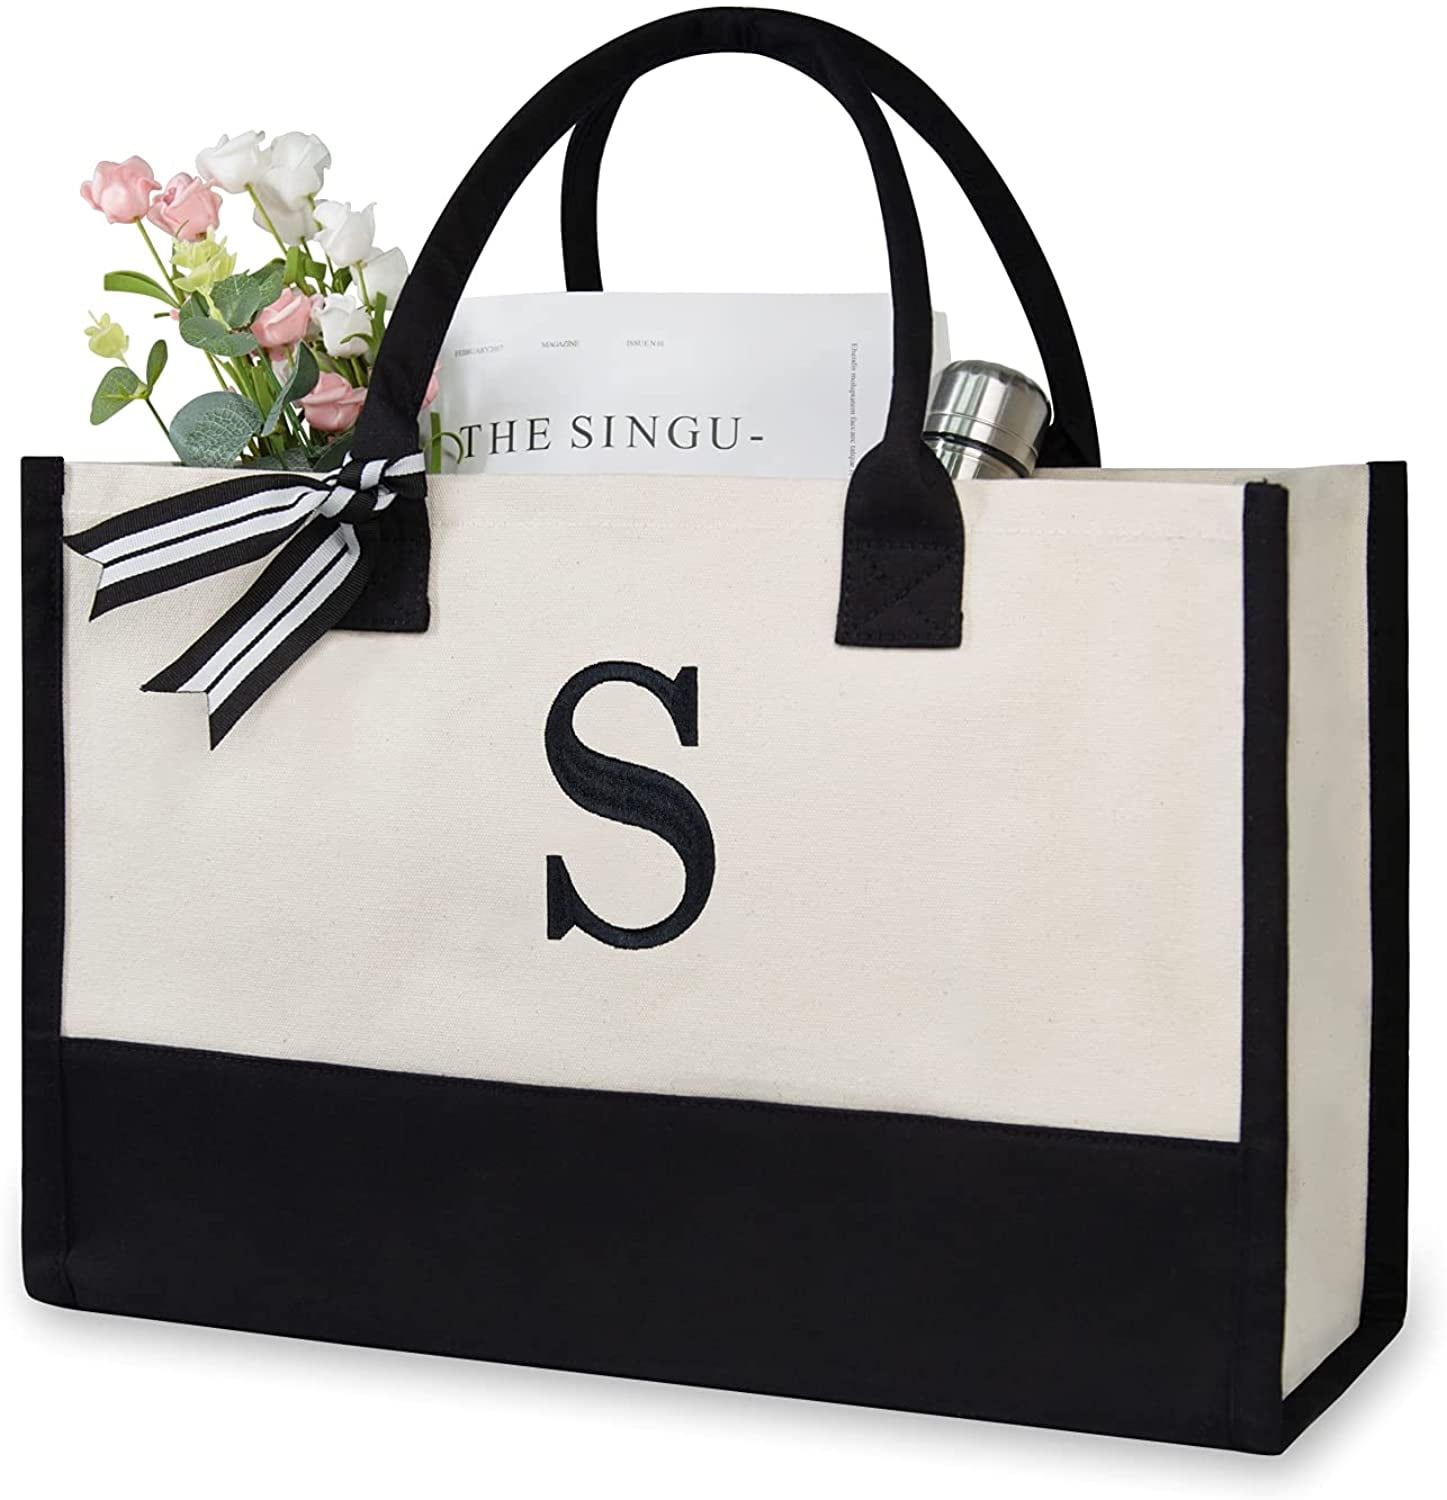 Personalized Canvas Tote Bag GiftSend Fashion and Lifestyle Gifts Online  J11106921 IGPcom